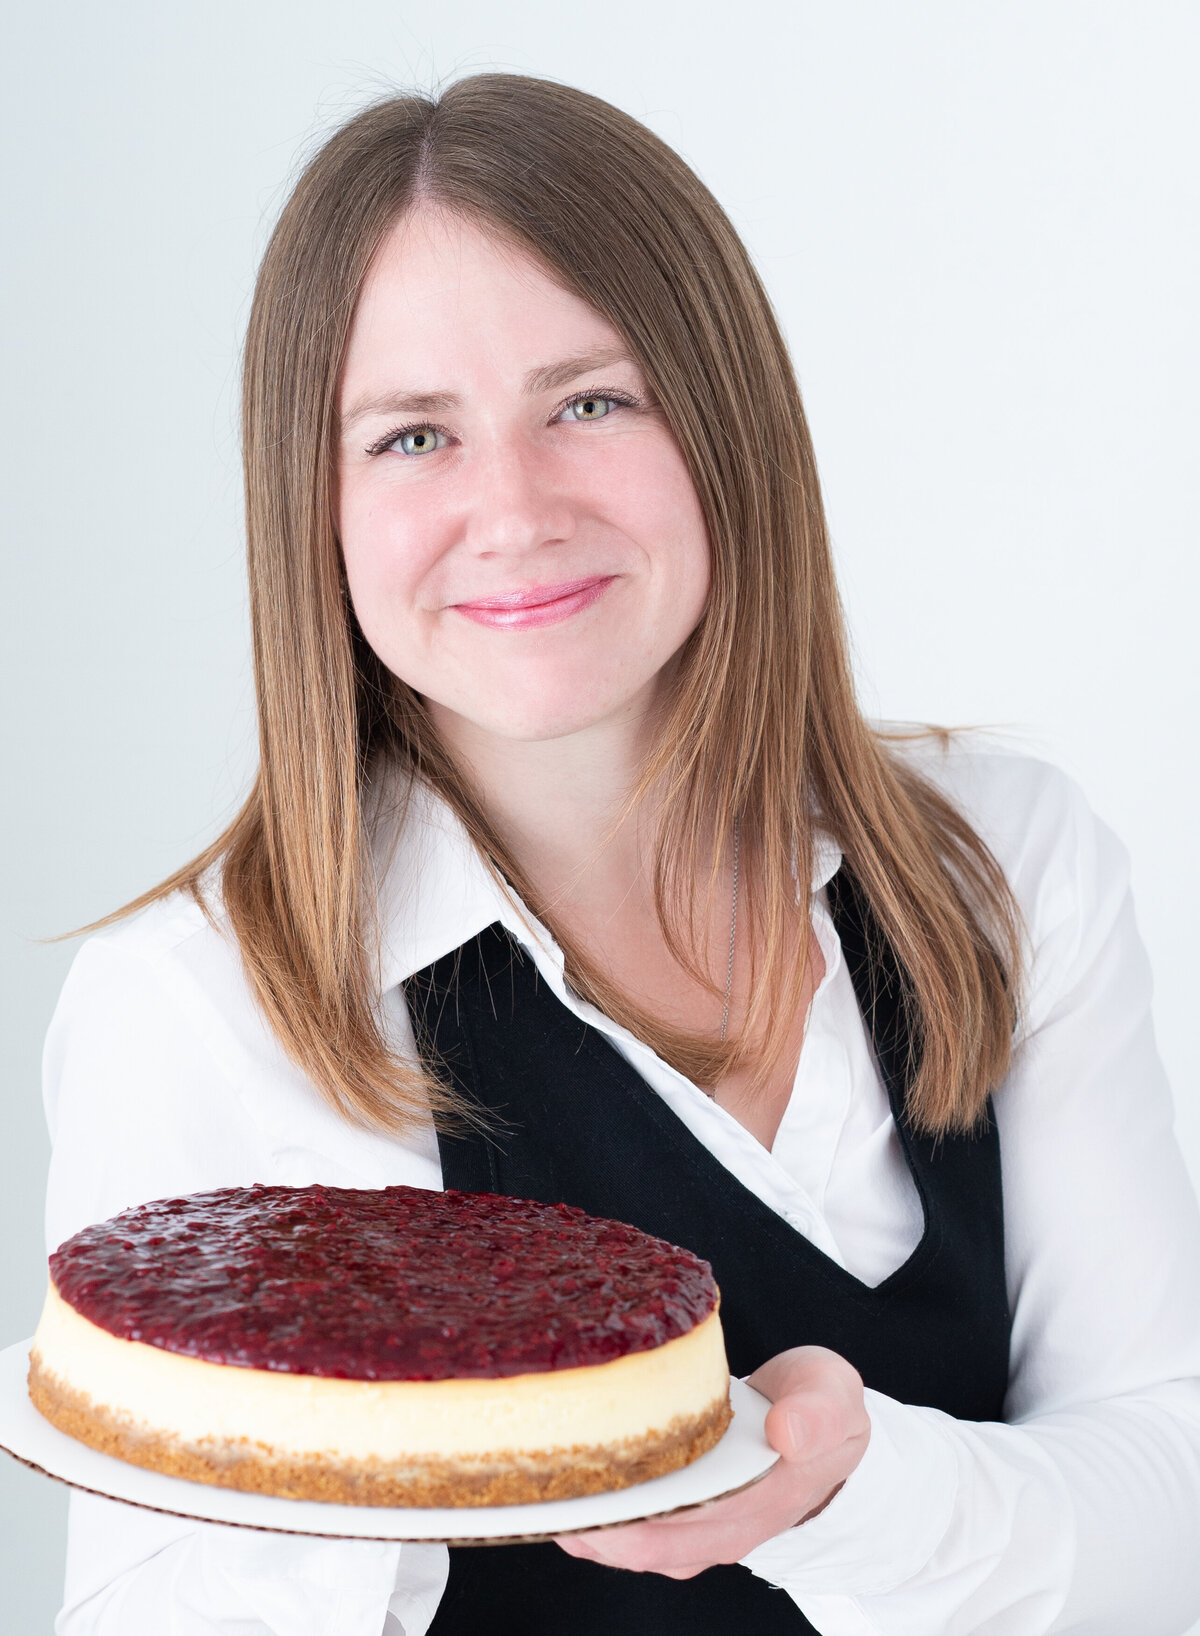 Ottawa branding photography of a baker holding a cherry cheescake.  Captured by JEMMAN Photography Commercial